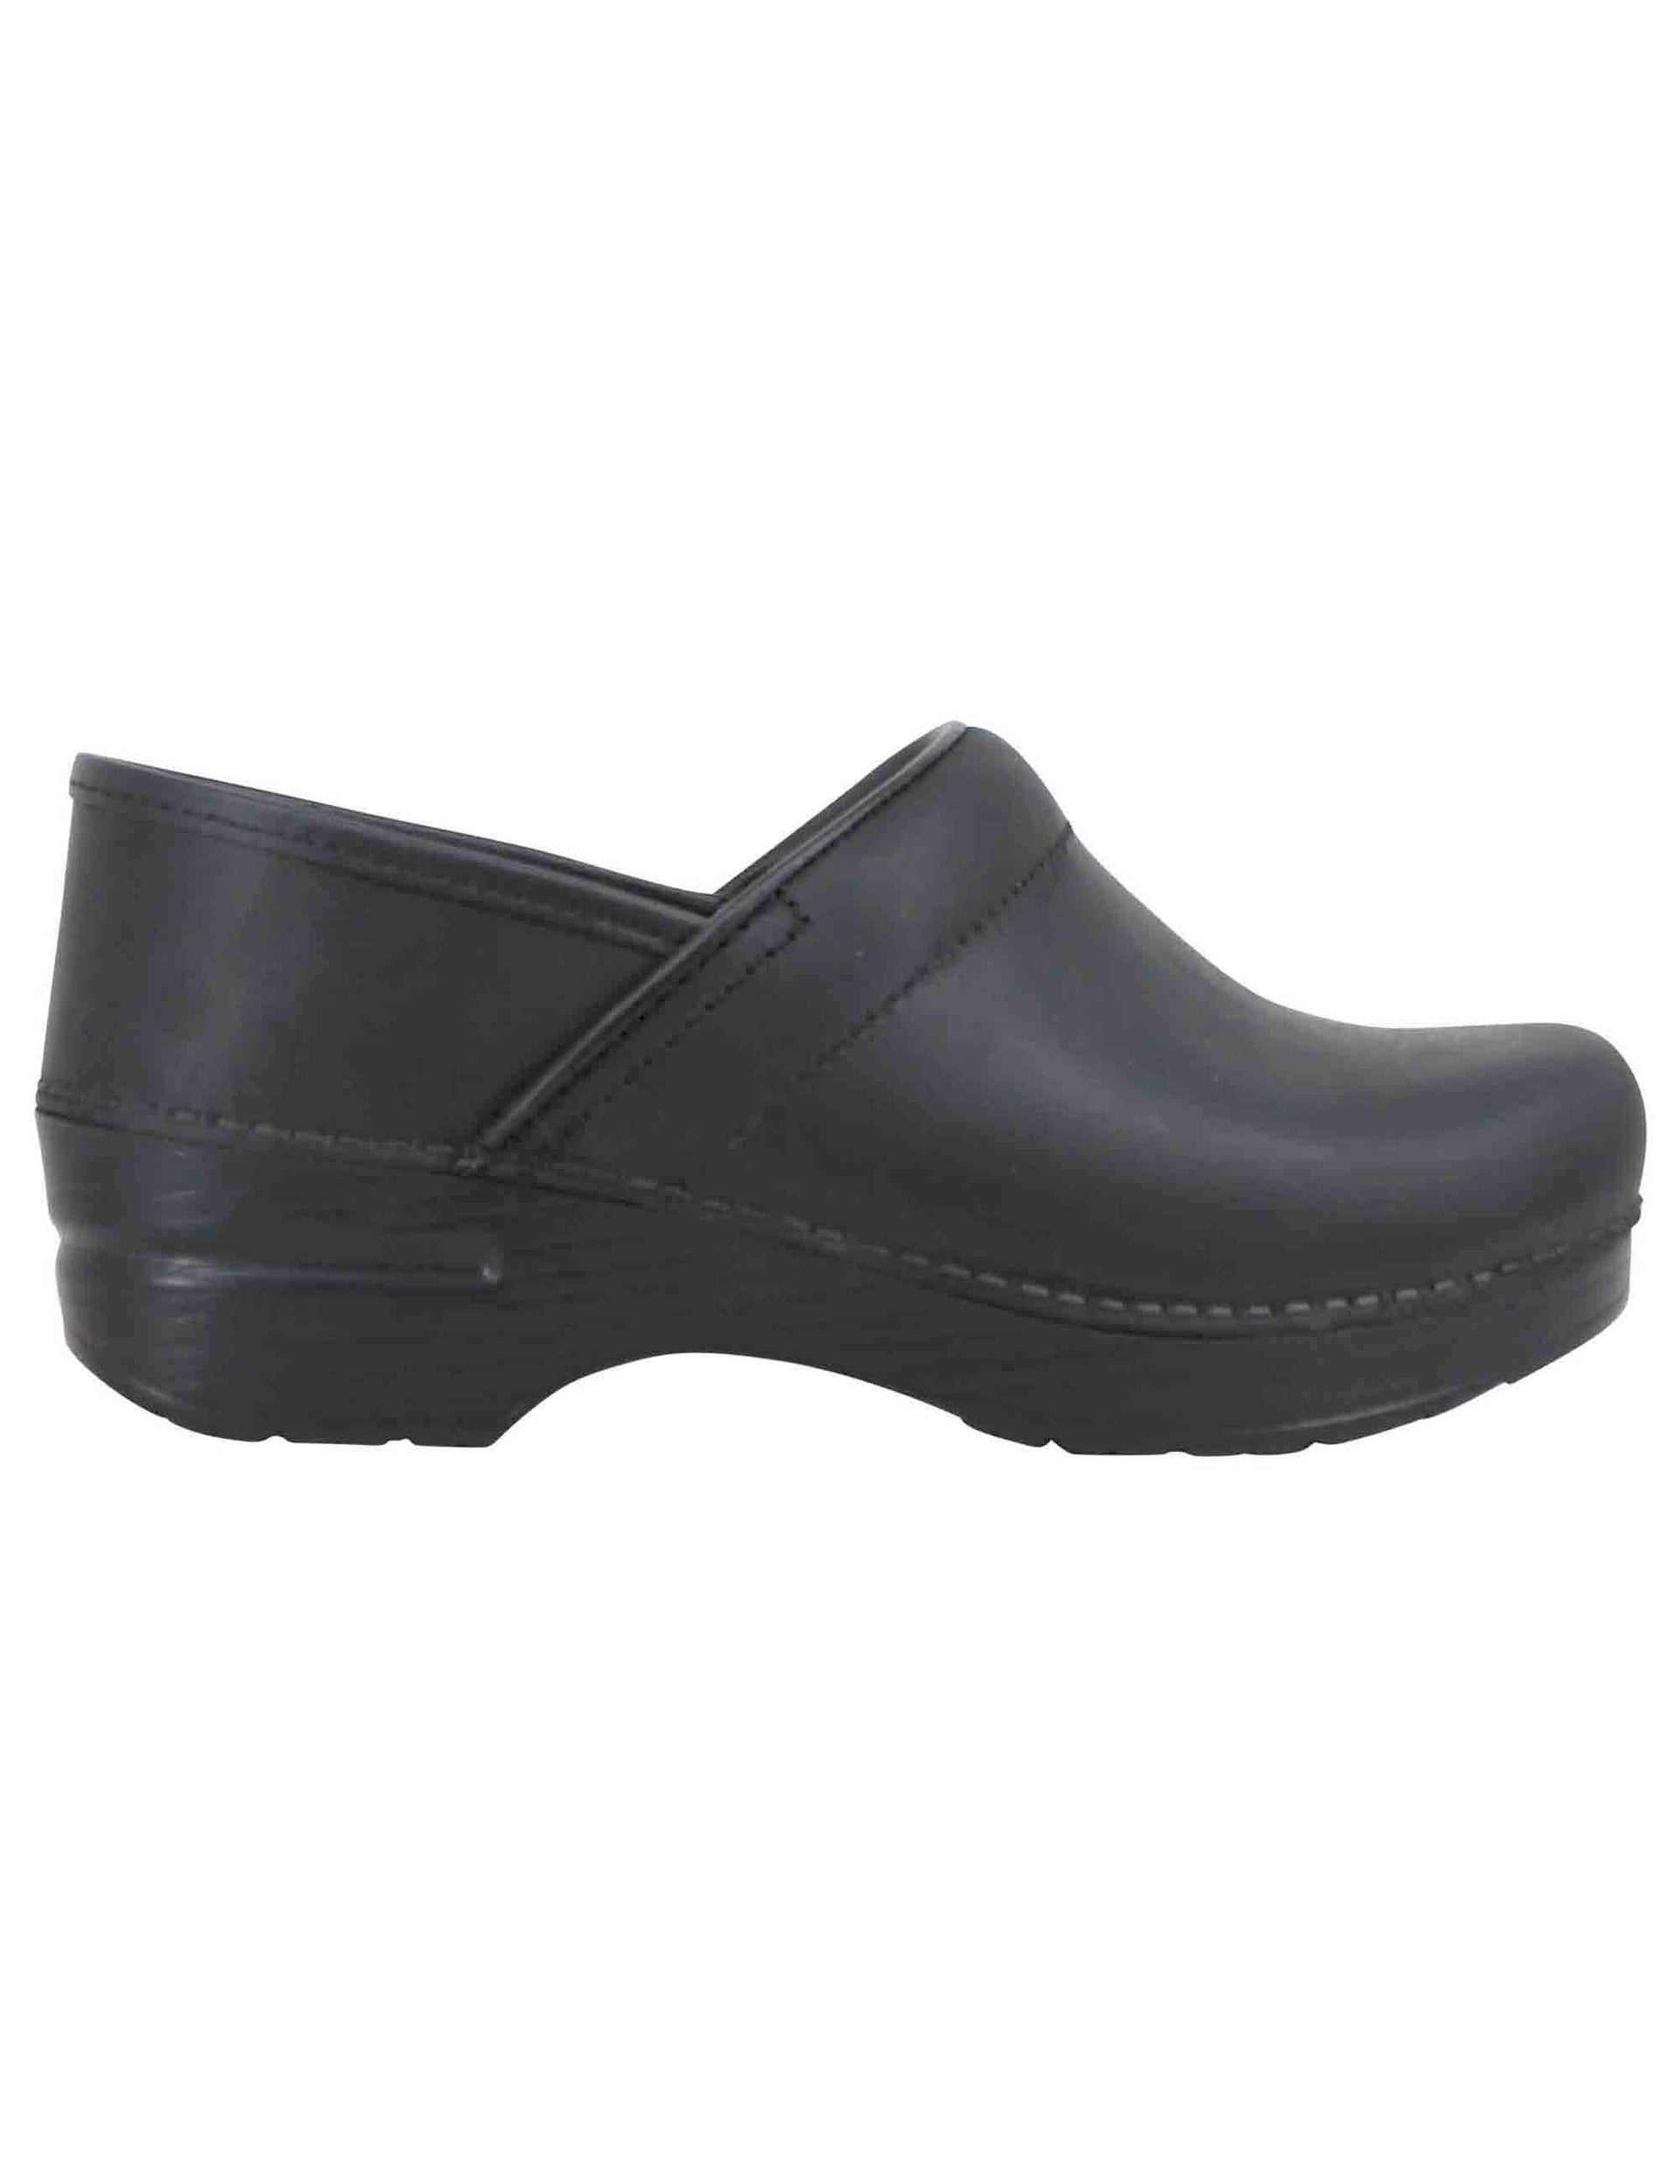 Clogs donna Professional in pelle nera